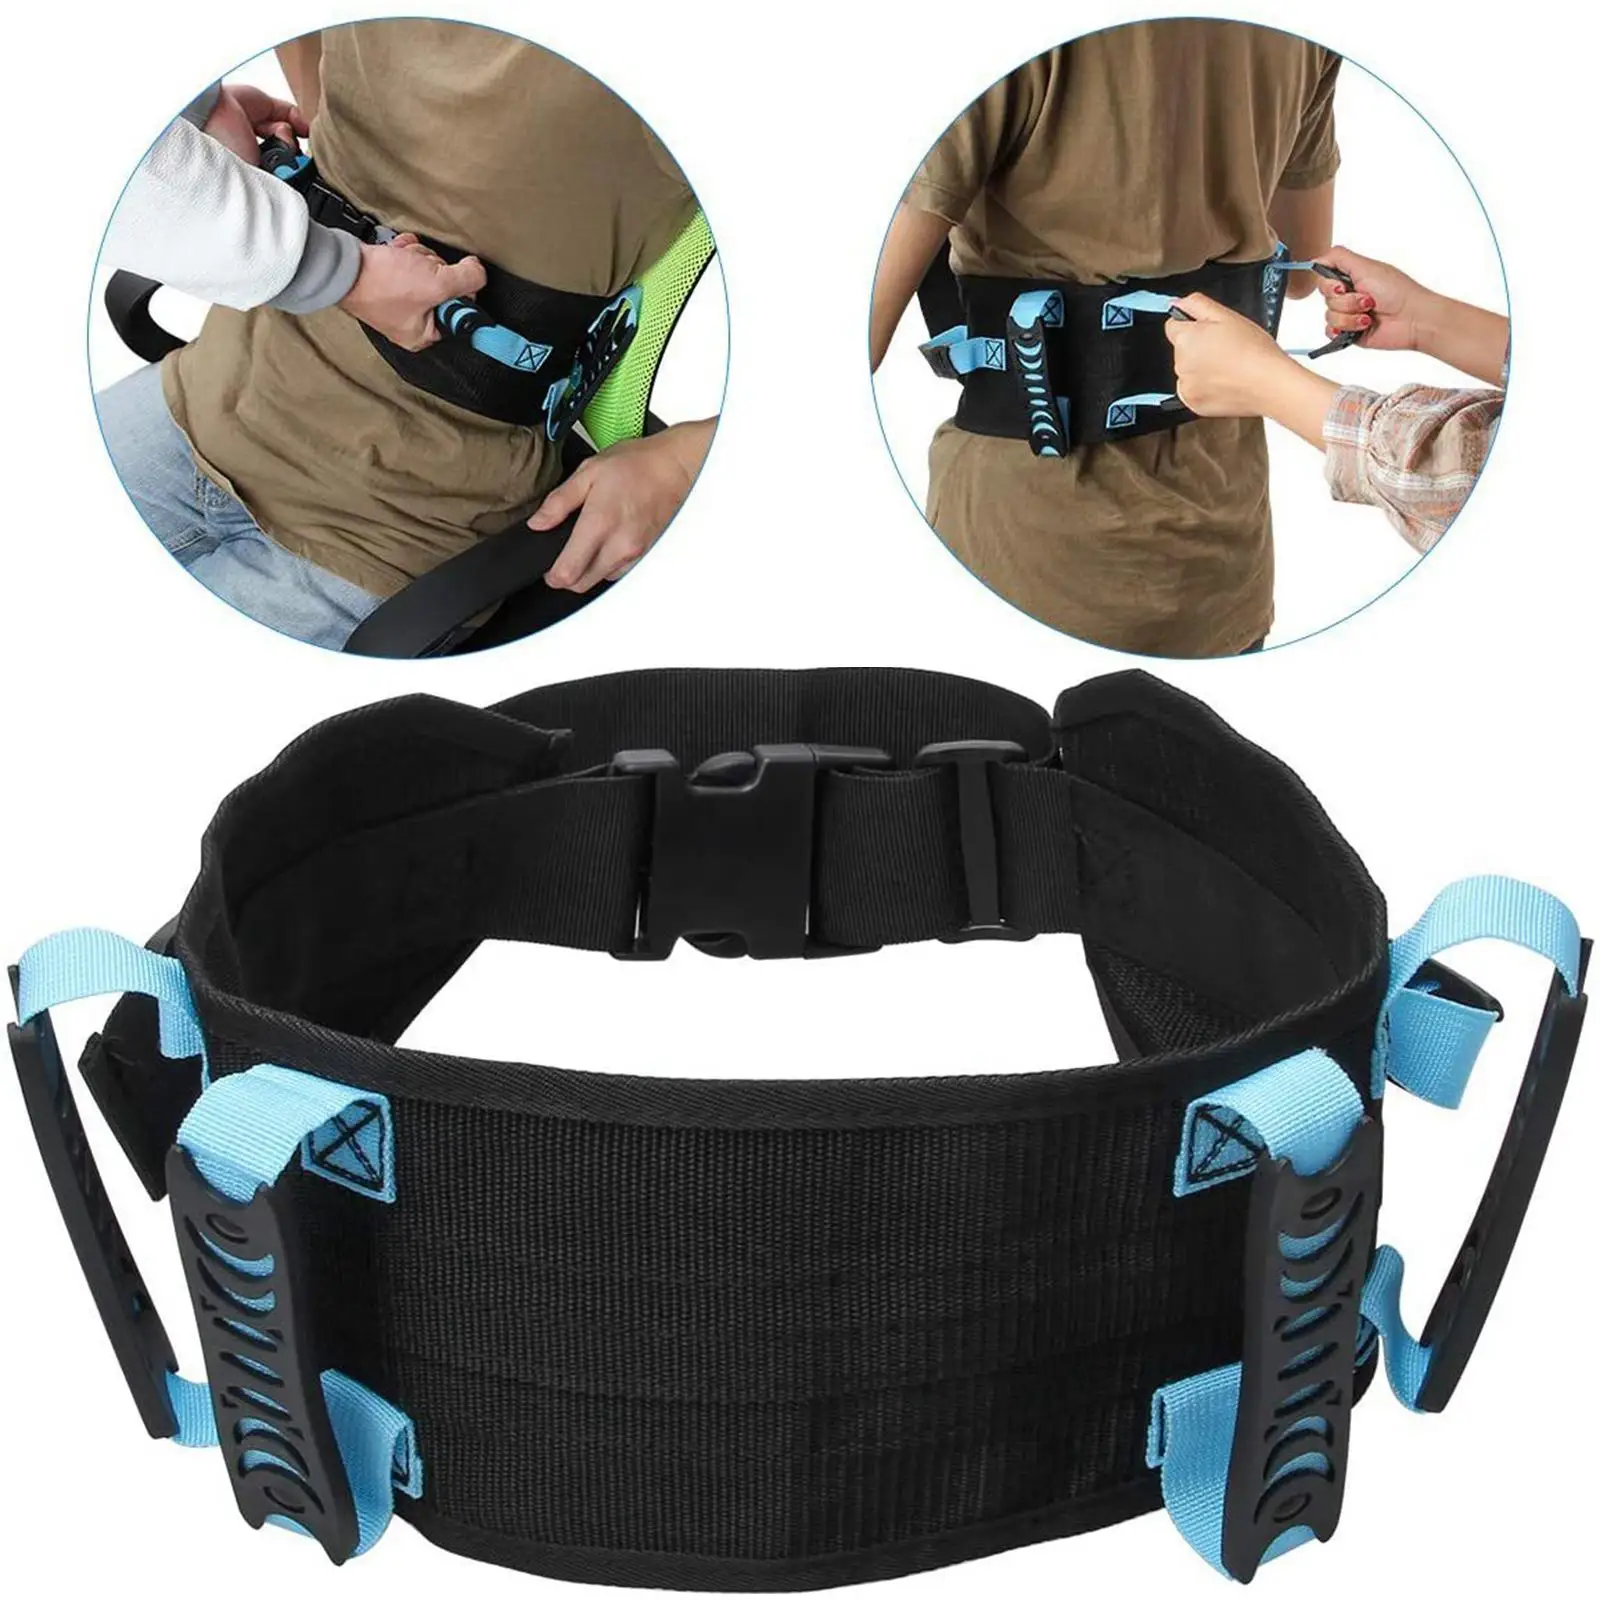 Transfer Belt with Handles Accessory Adjustable 35-50 Inches Seniors Elderly